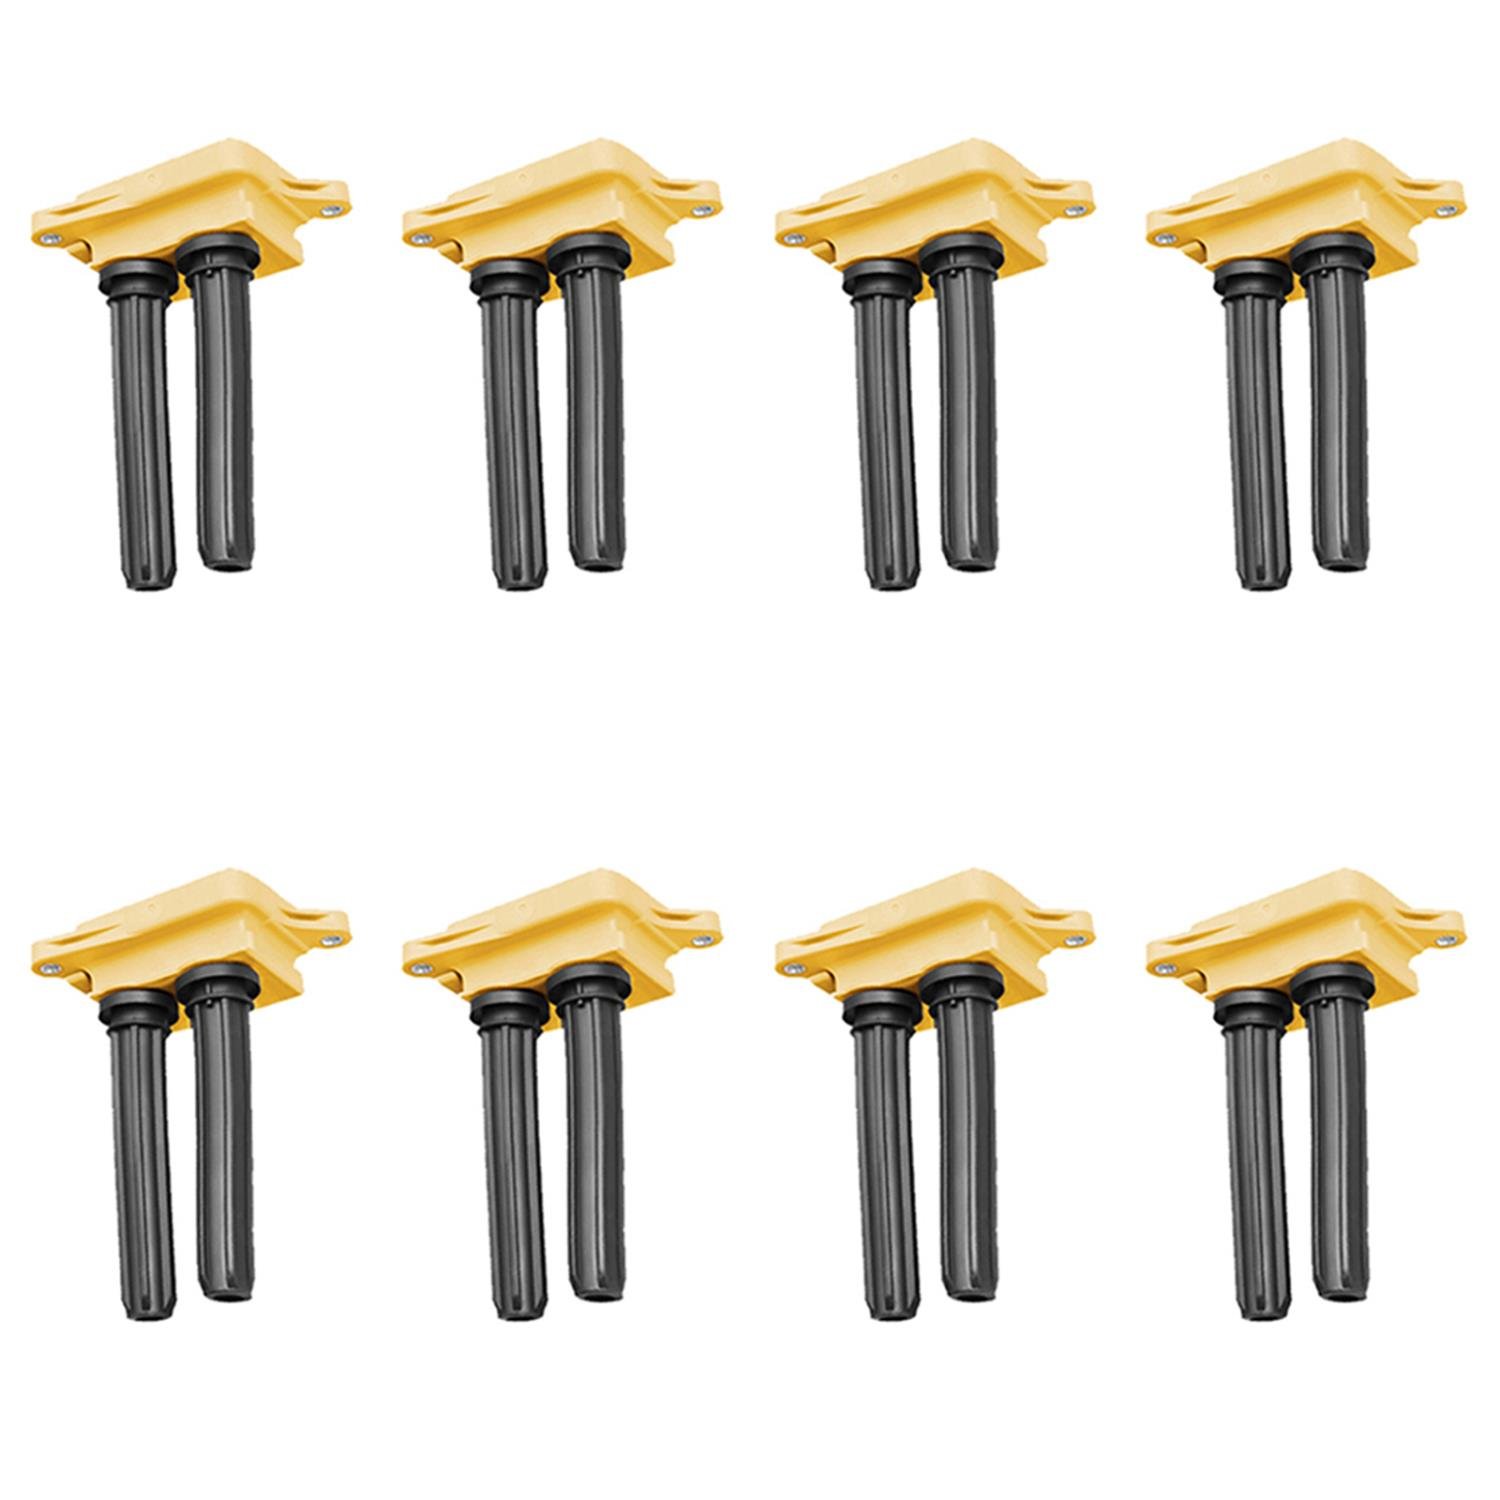 High-Performance Ignition Coils for 2009-2012 Dodge Ram 1500 V8 [Yellow]